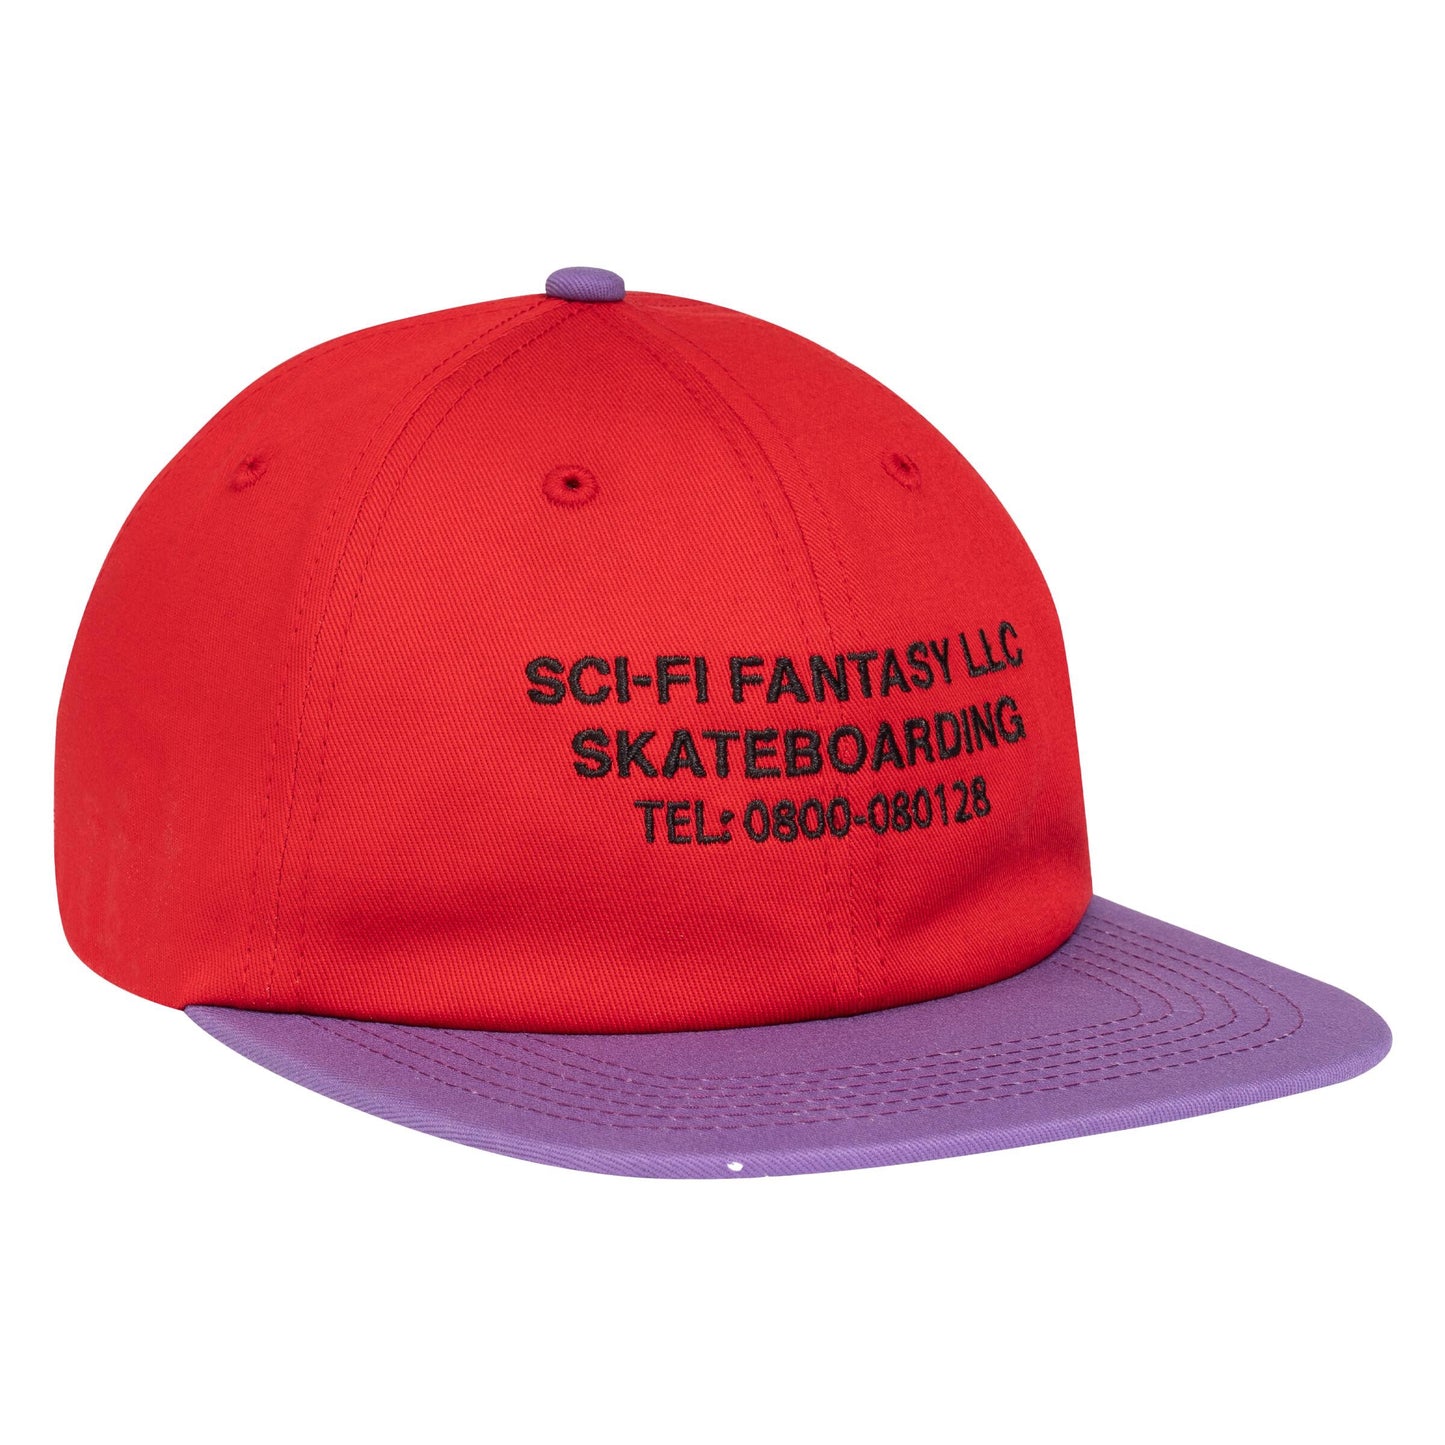 Sci-Fi Fantasy Business Post Hat: Assorted Colors